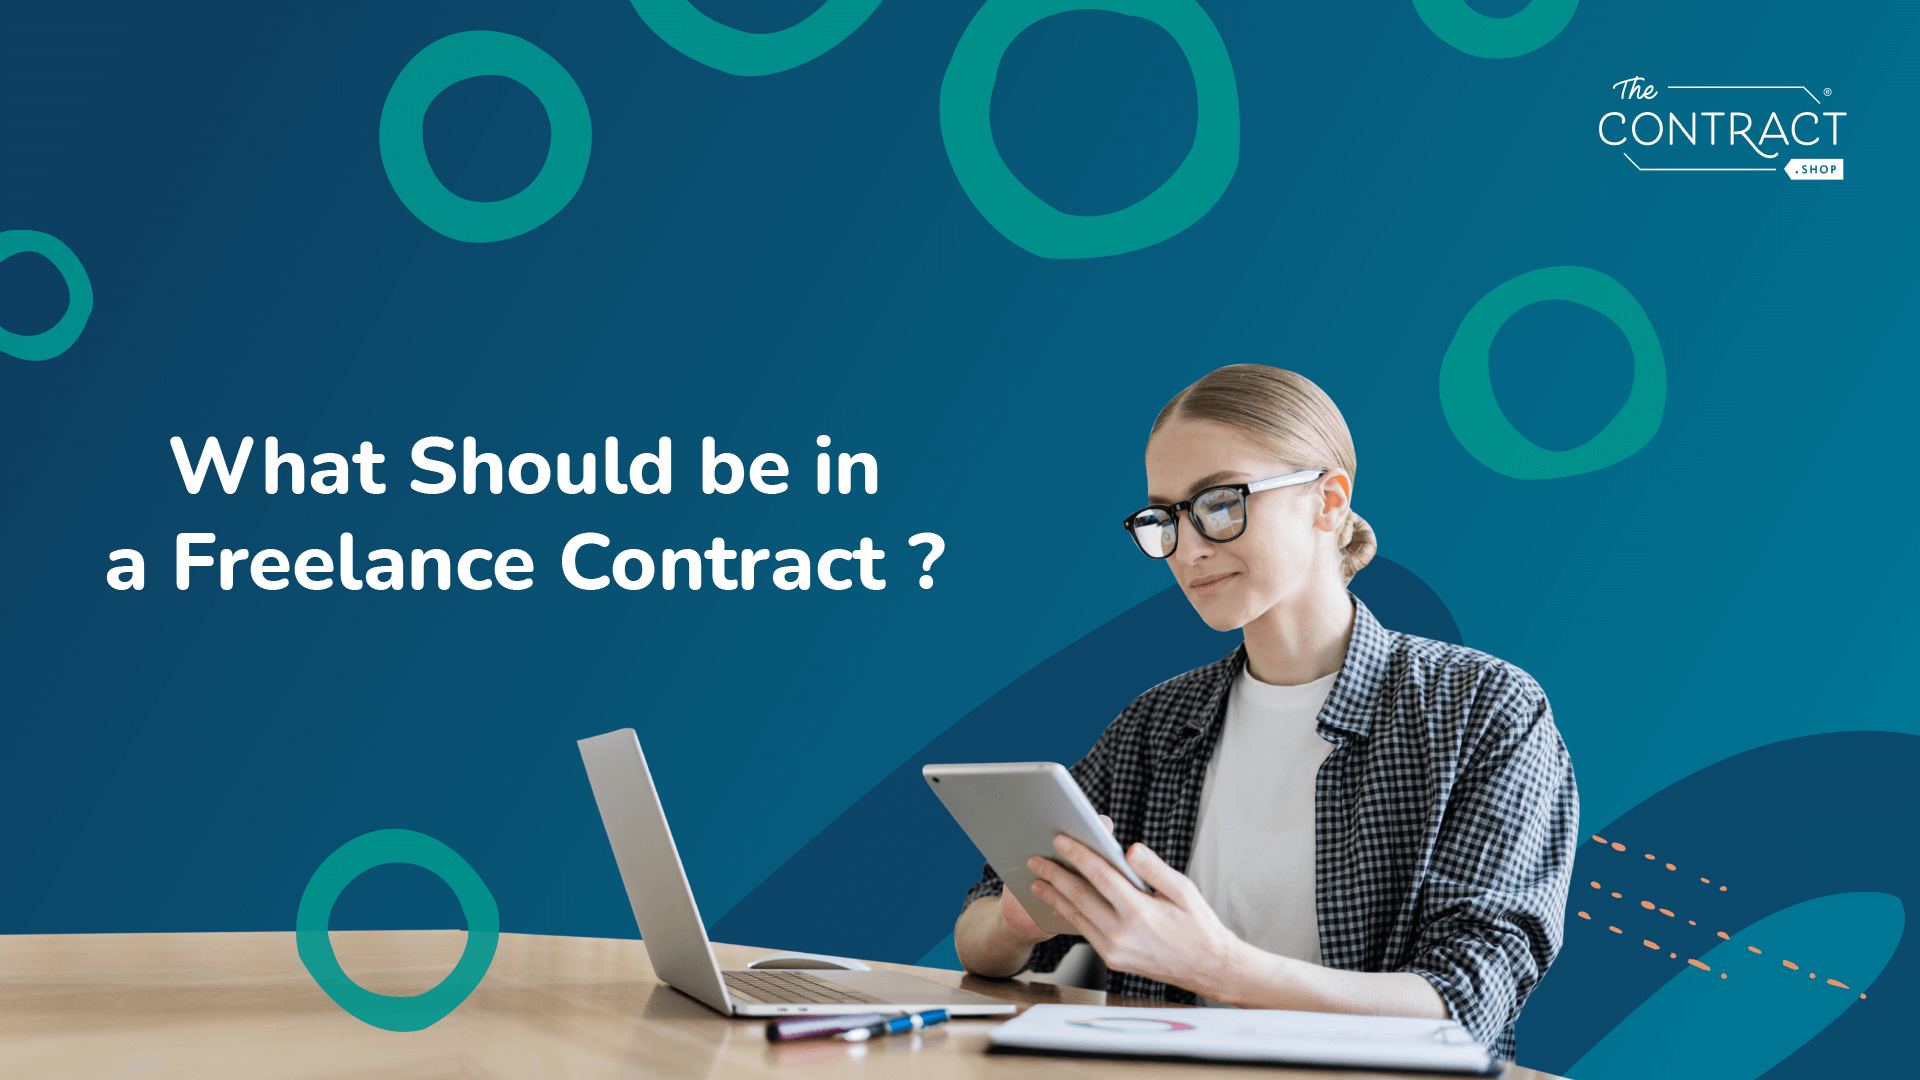 What Should be in a Freelance Contract?